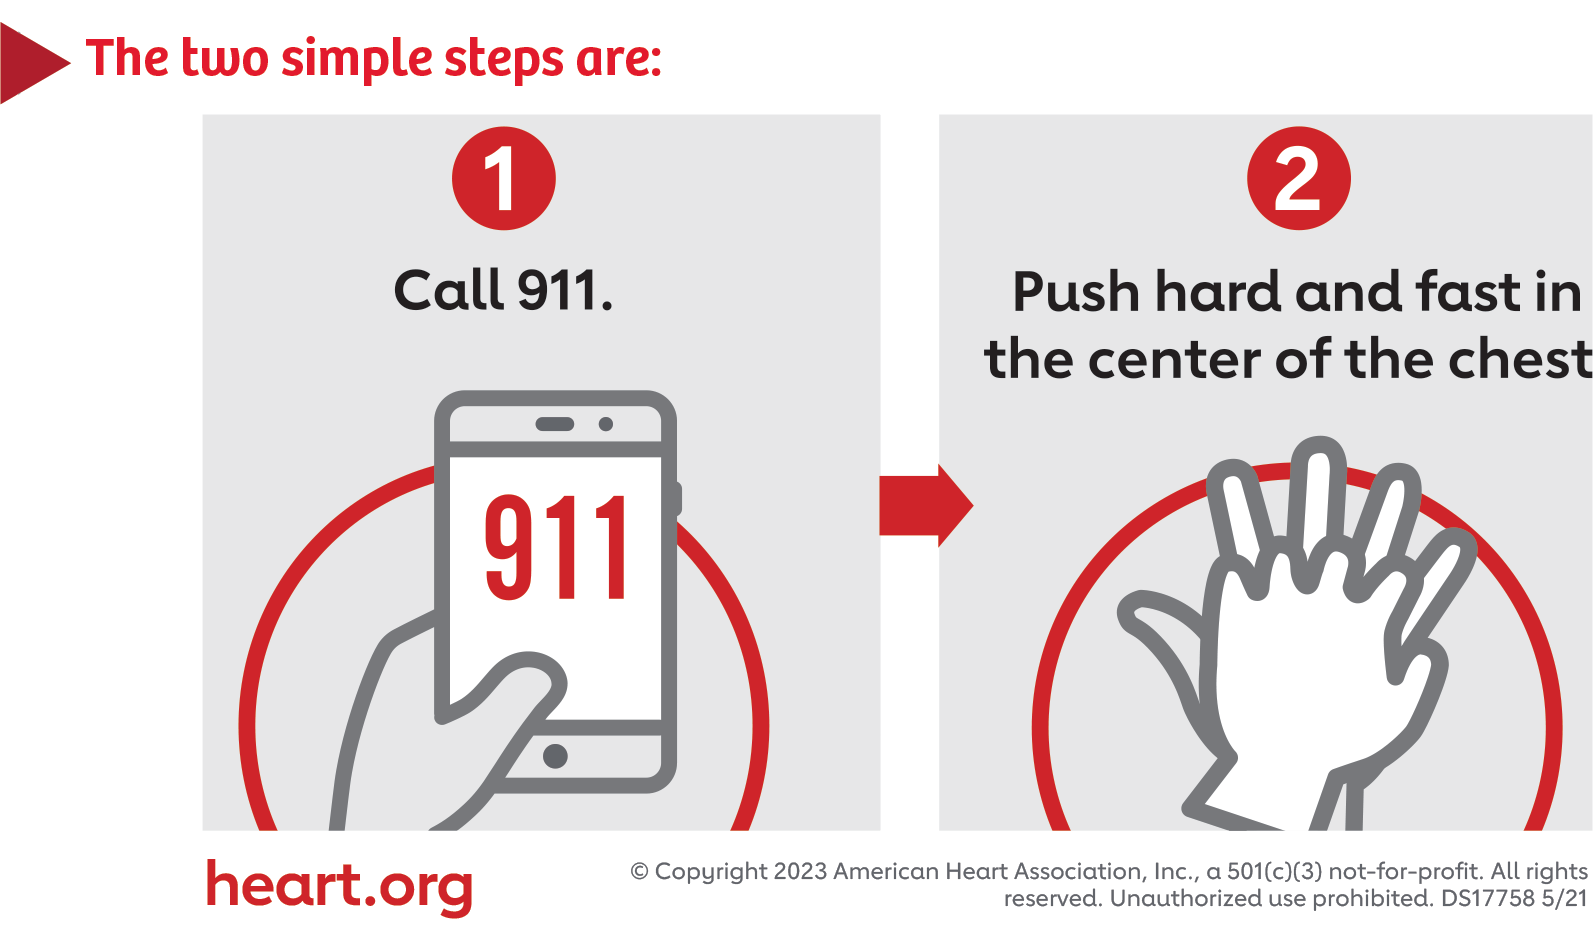 The two simple steps are: 1. Call 911 2. Push hard and fast in the center of the chest. heart.org, Copyright 2023 American Heart Association, Inc., a 501(c)(3) not-for-profit. All rights reserved. Unauthorized use prohibited. DS17758 5/21